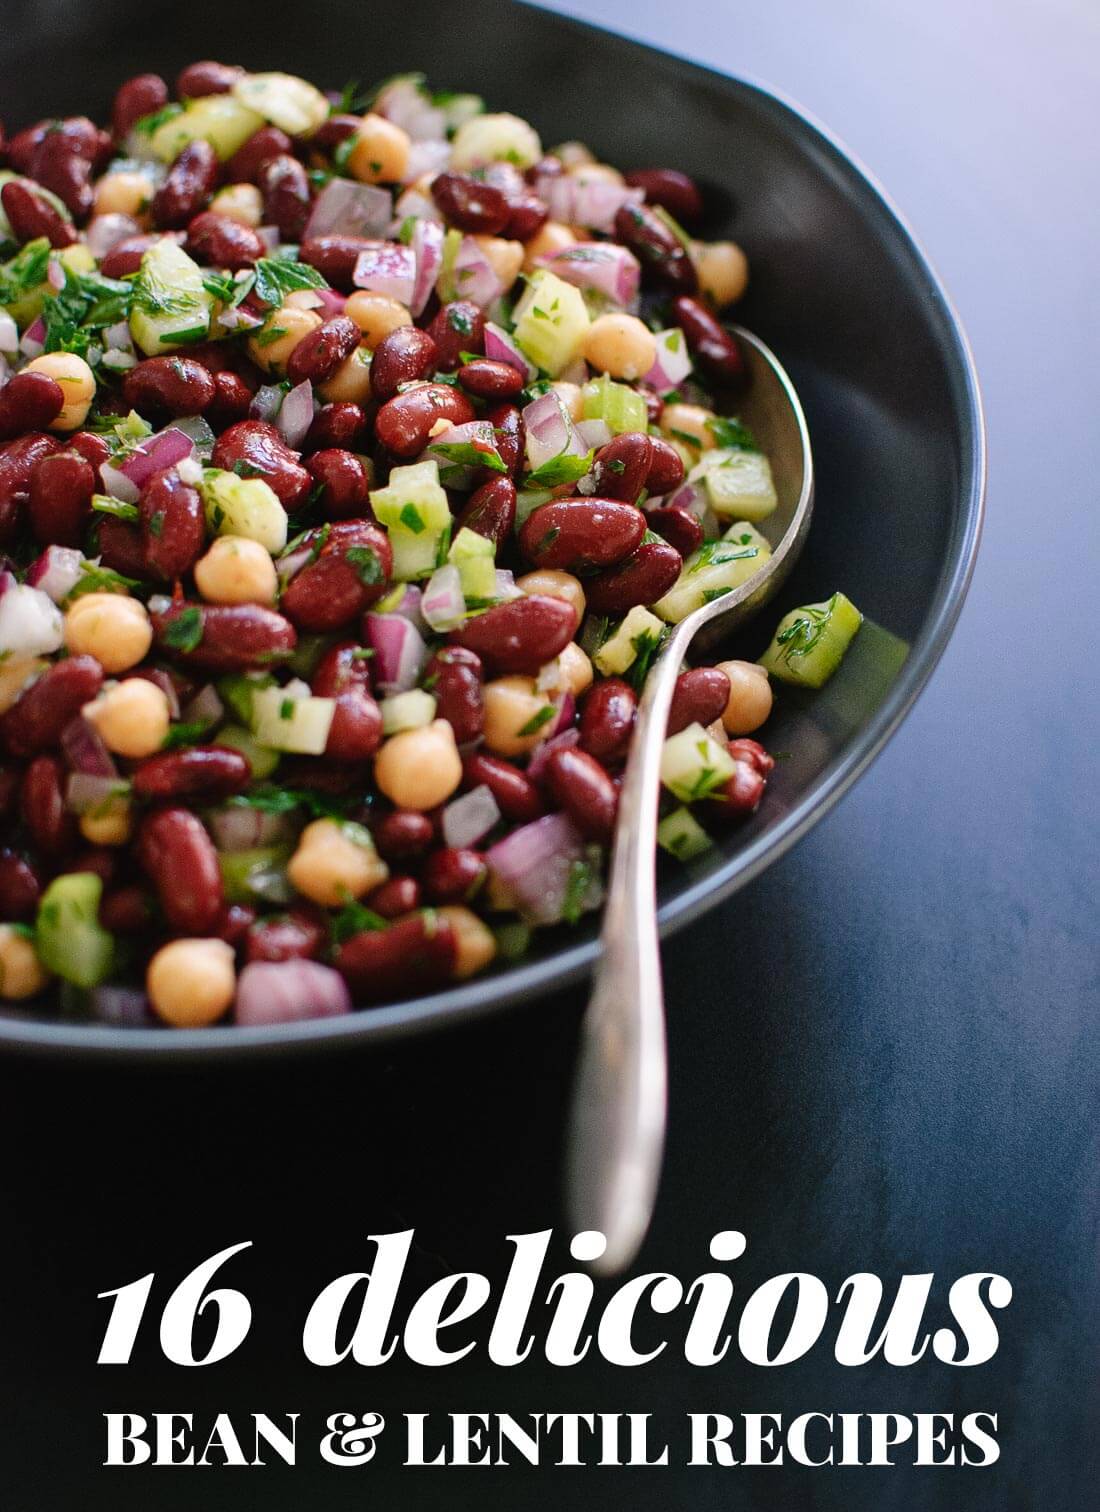 16 Delicious Recipes Featuring Beans & Lentils – Cookie and Kate